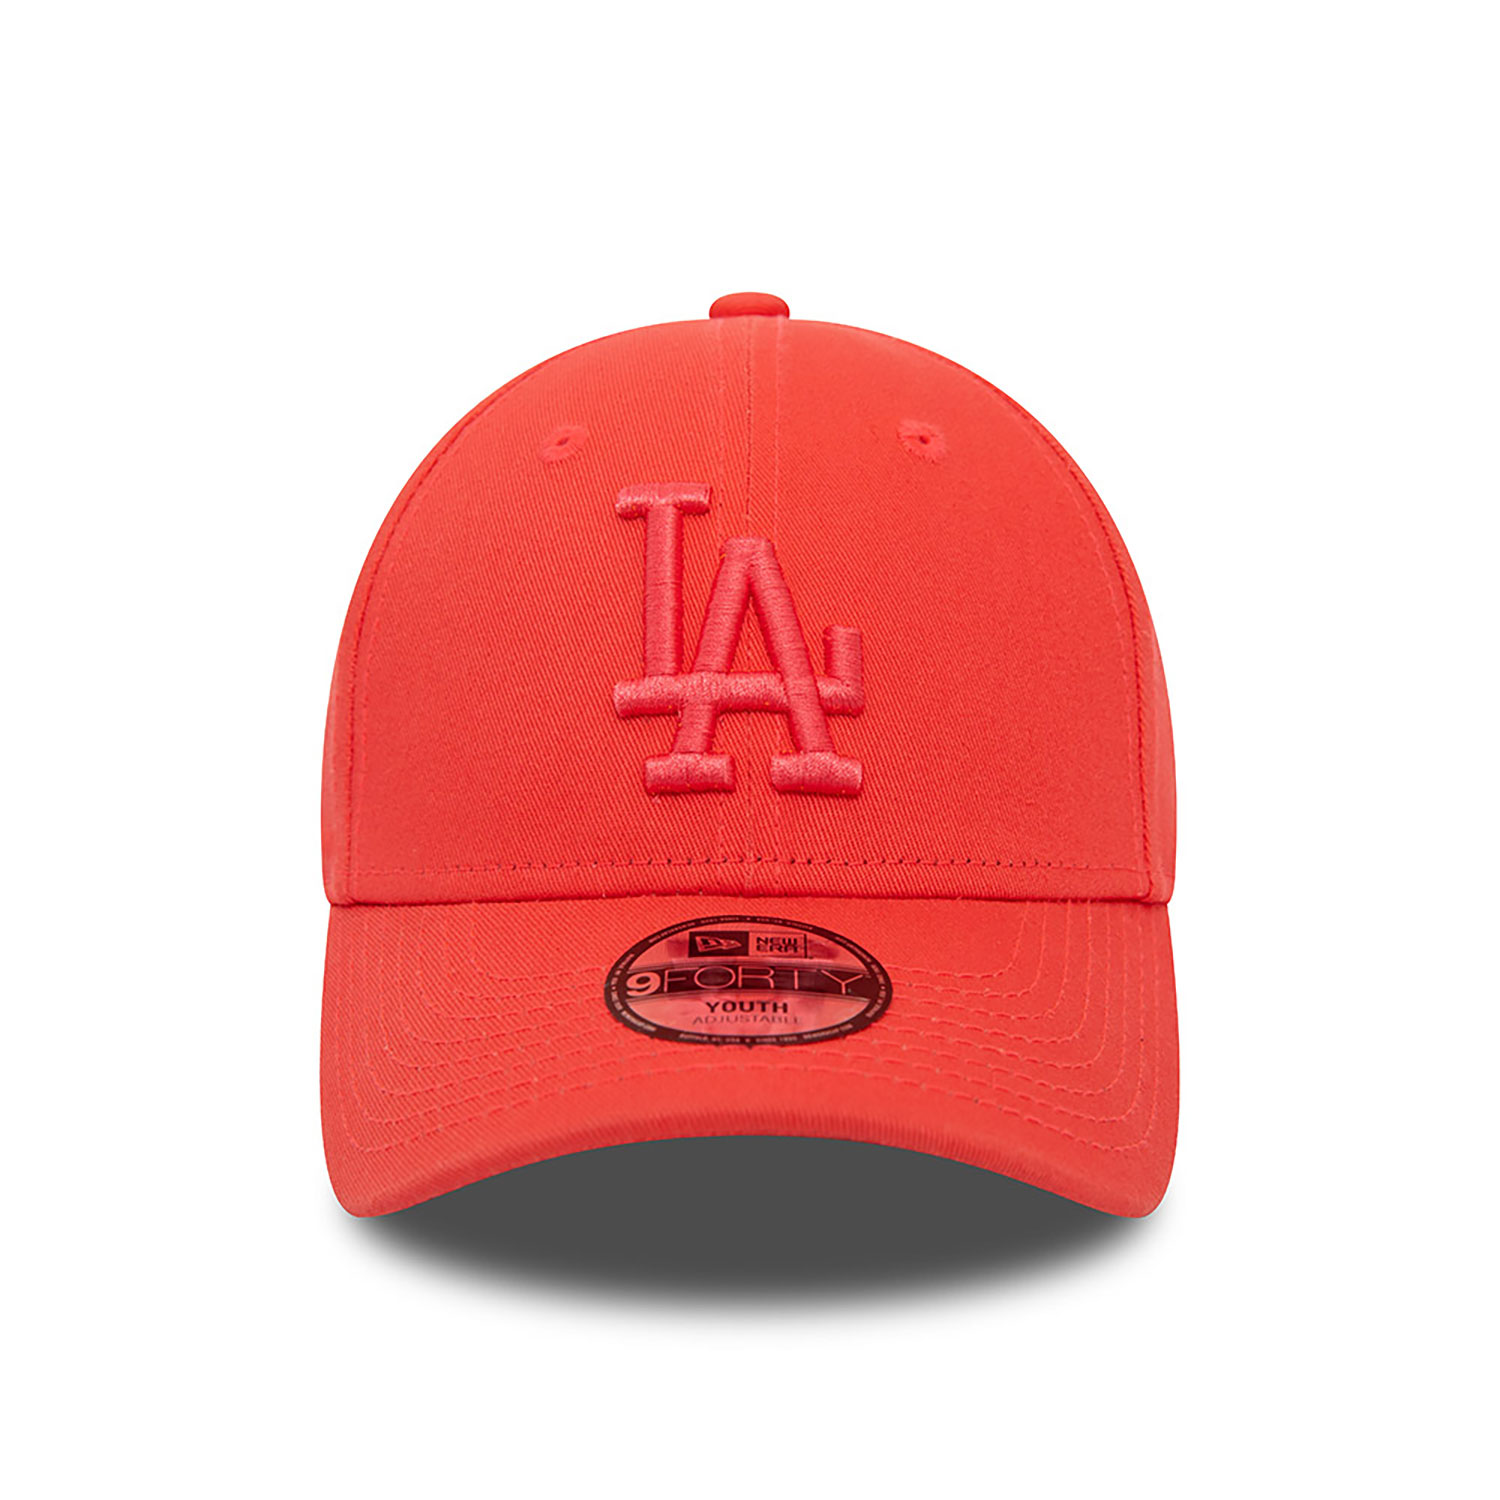 LA Dodgers Youth League Essential Red 9FORTY Adjustable Cap